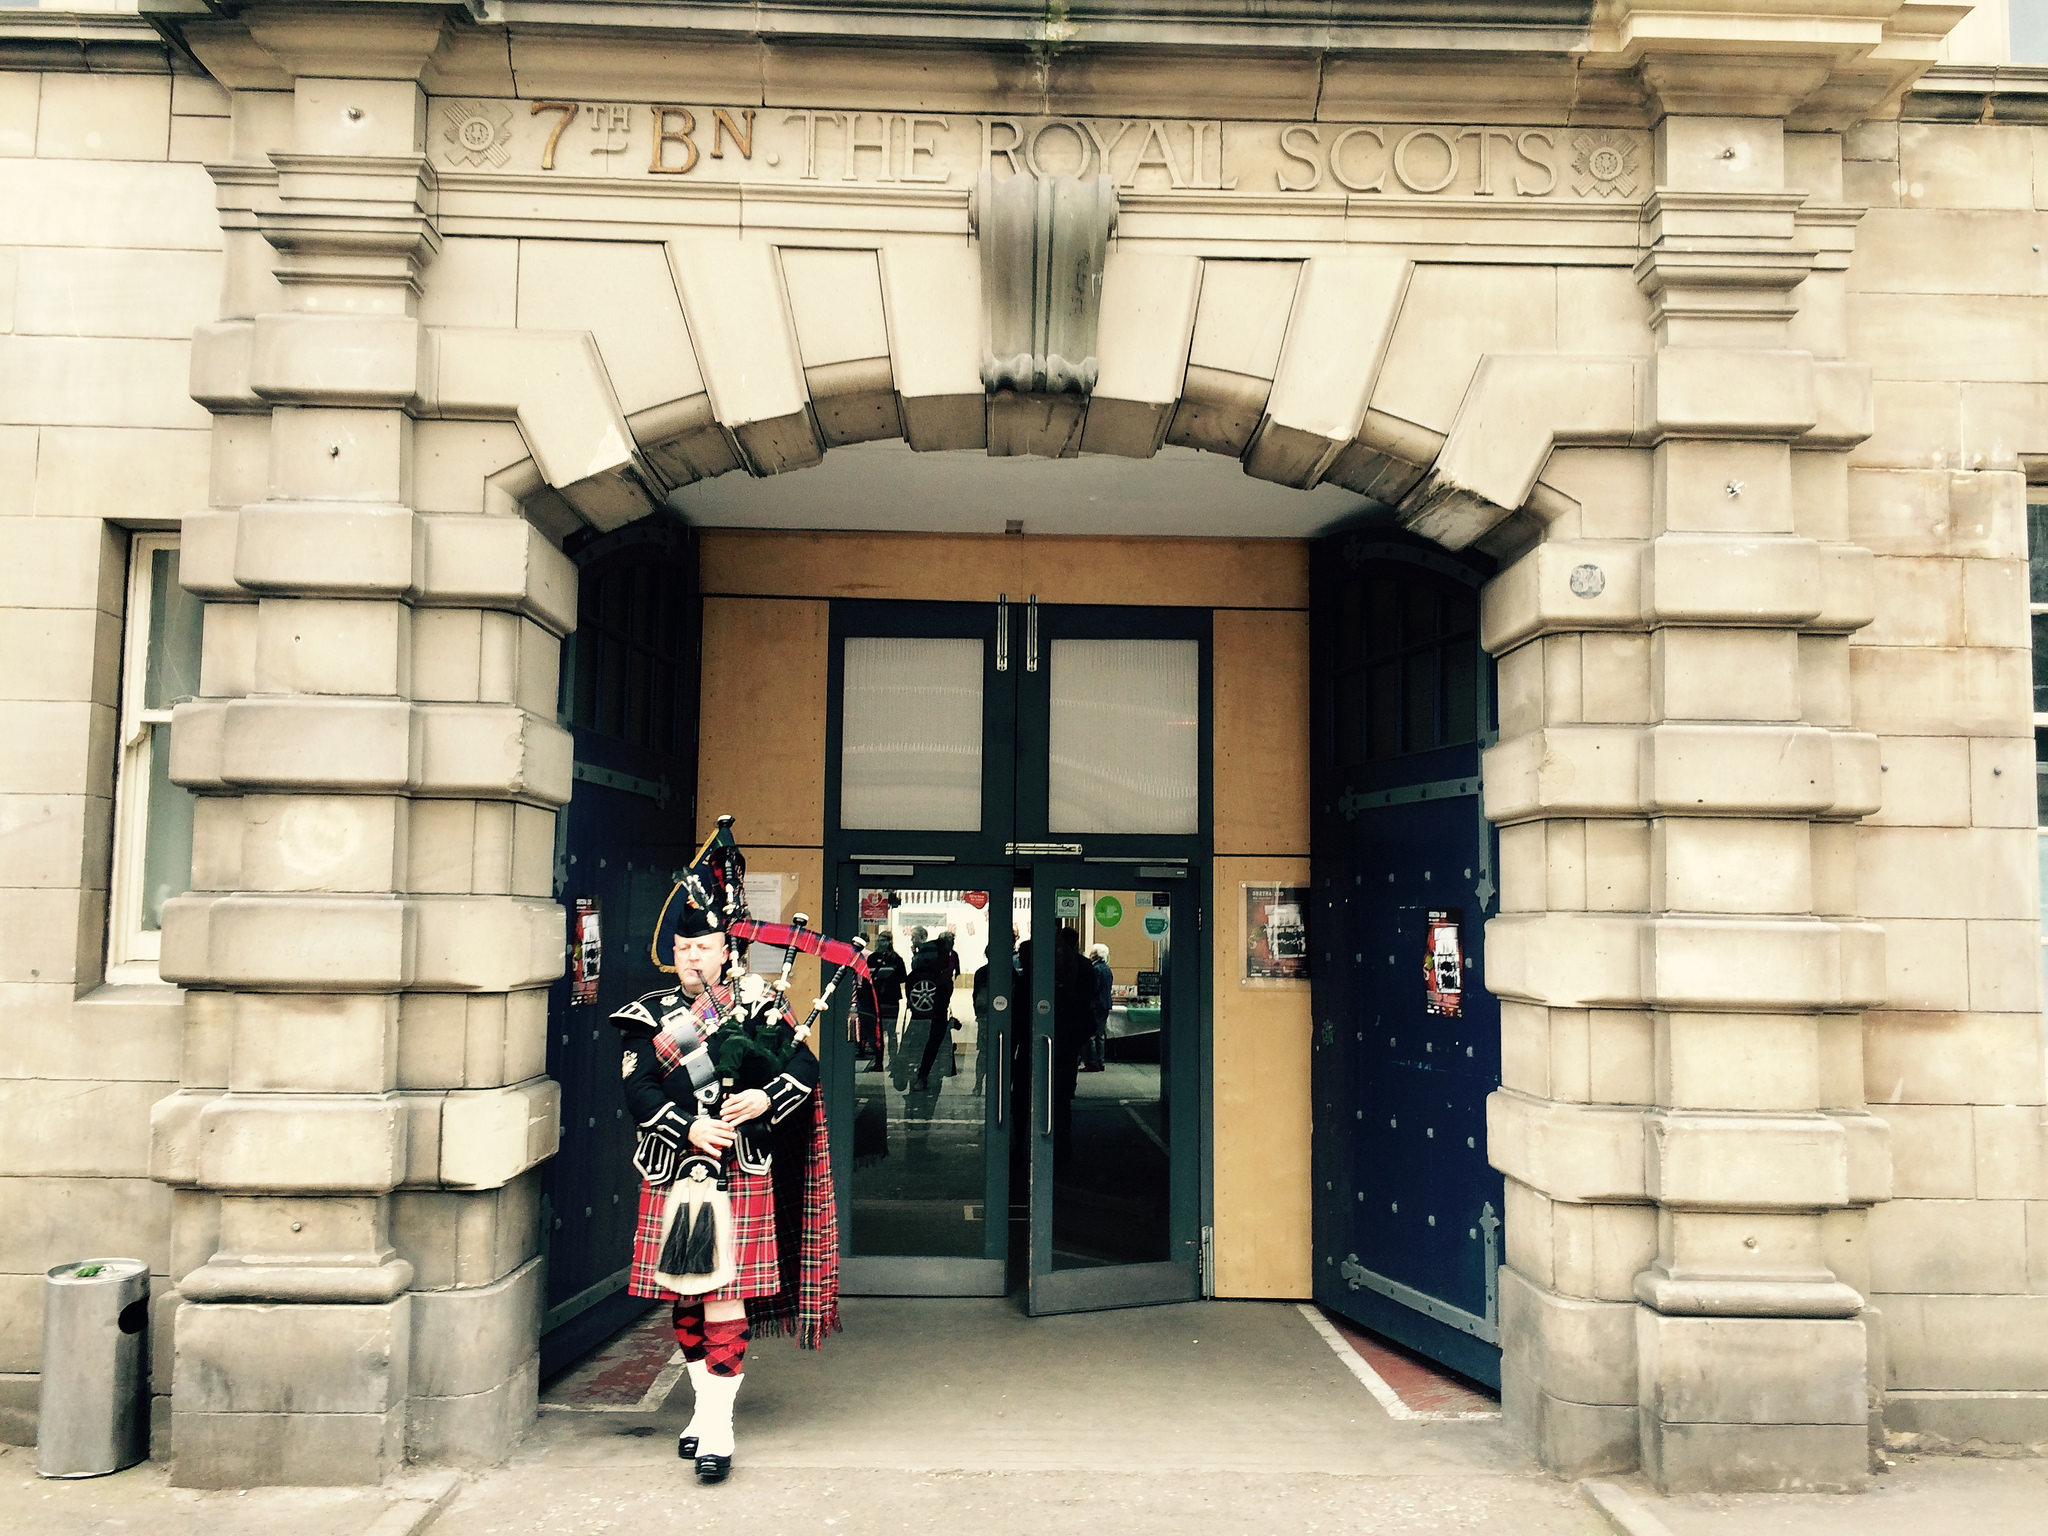 Bagpipes being played outside the Drill Hall